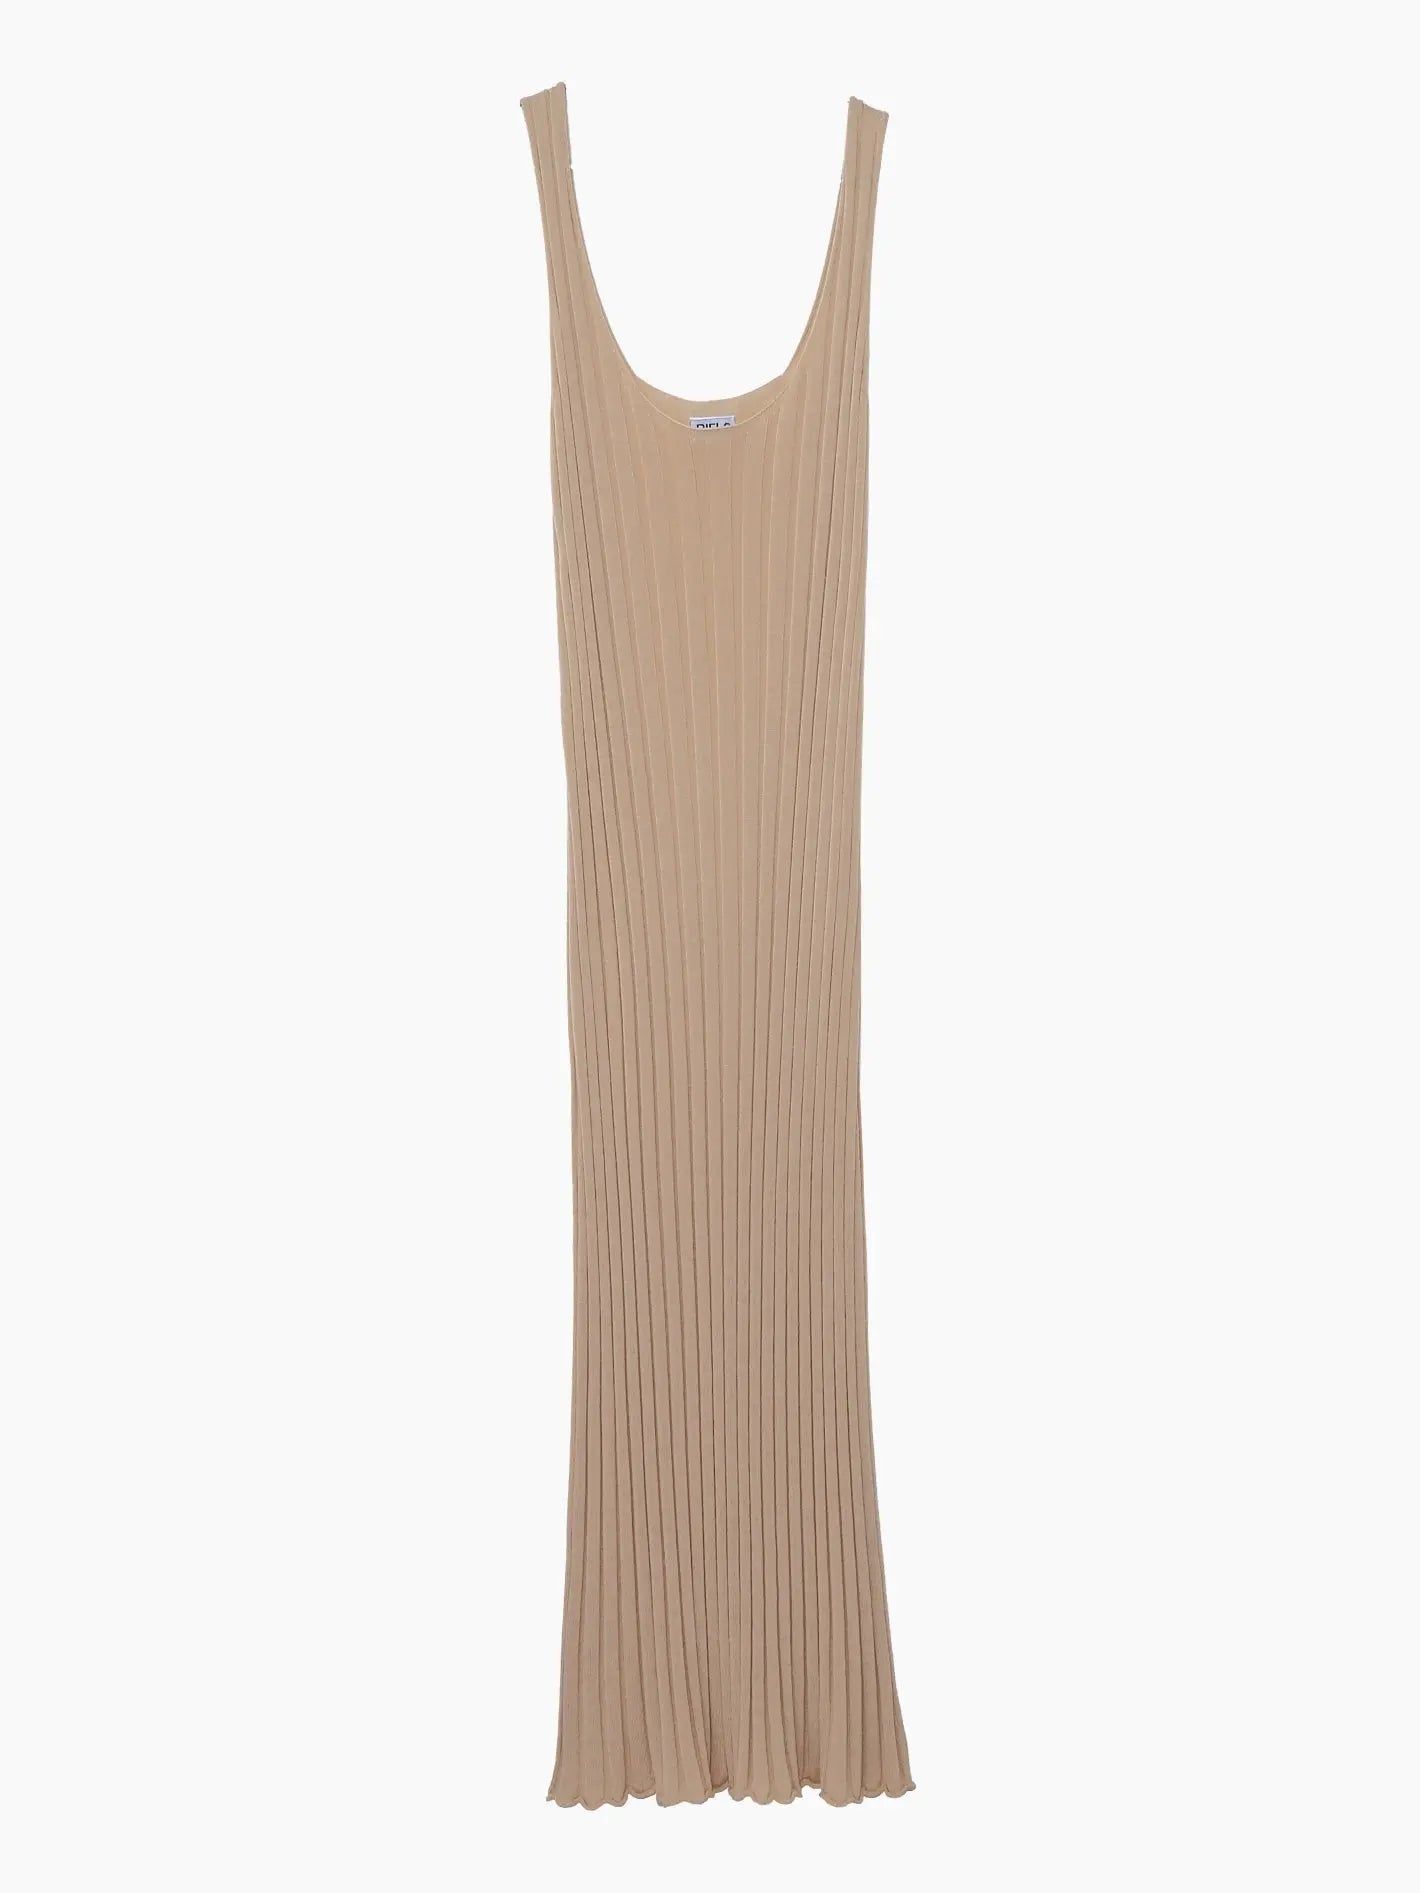 A sleeveless, floor-length beige Clava Dress Latte by Bielo with wide straps and a scoop neckline. The dress features a pleated texture, creating elegant vertical lines throughout the fabric. The overall design is simple and sophisticated, perfect for your next visit to Barcelona or shopping at Bassalstore.